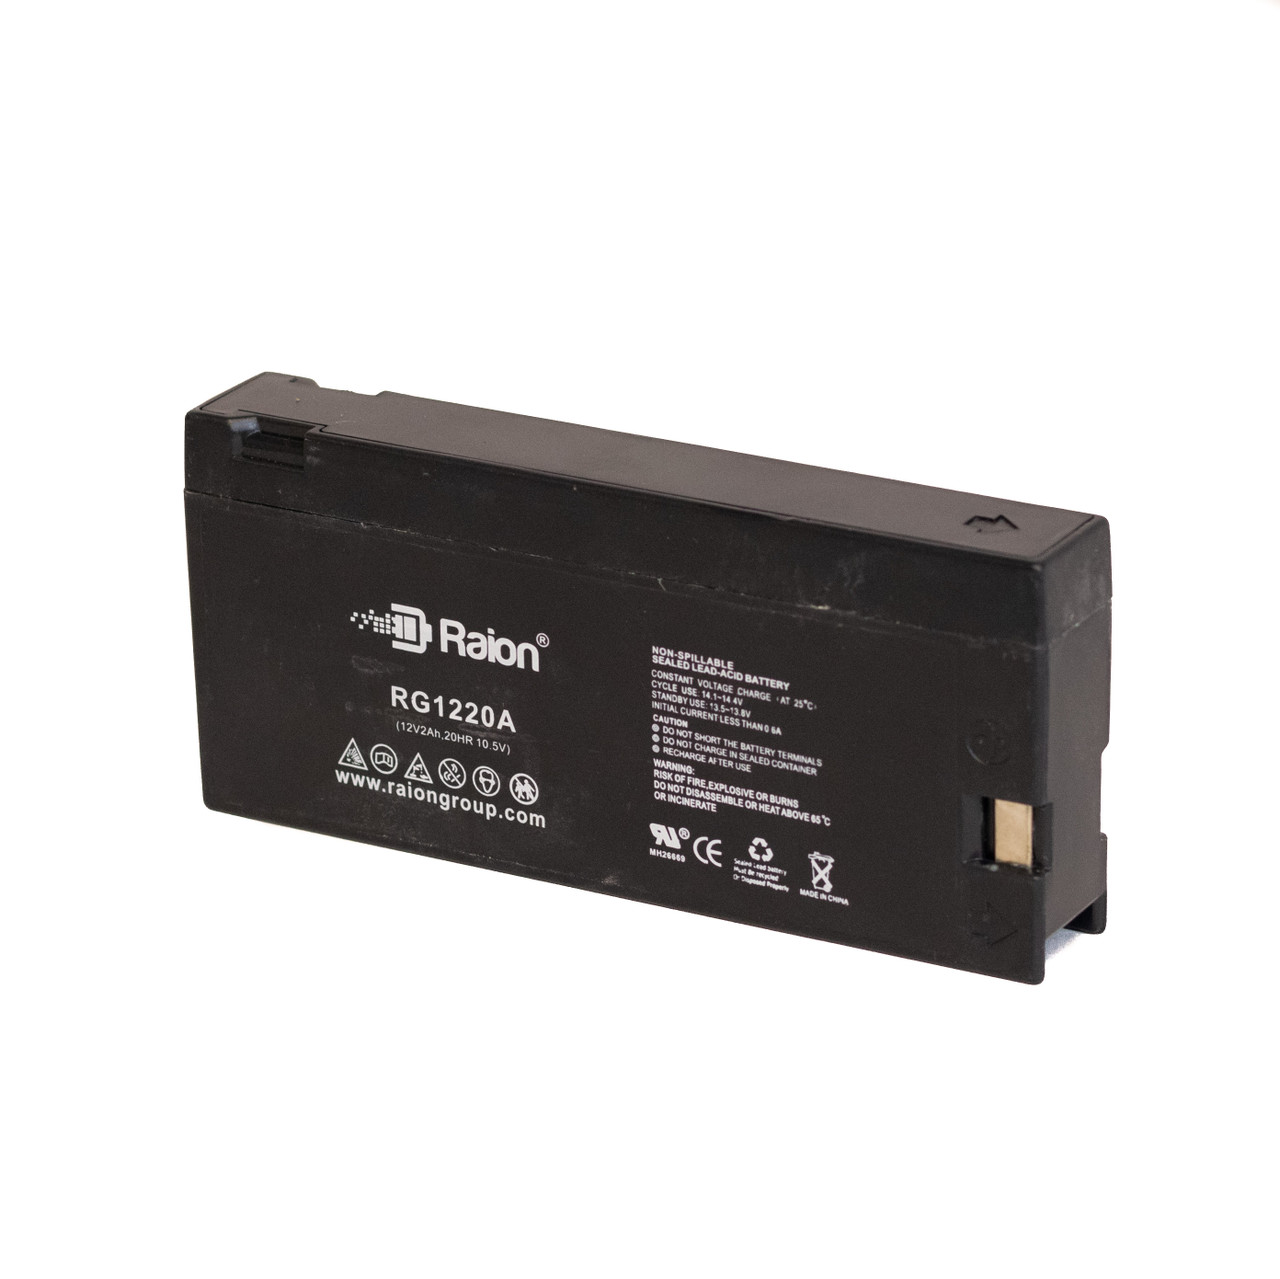 Raion Power RG1220A Replacement Battery for Koyosonic NP2-12A